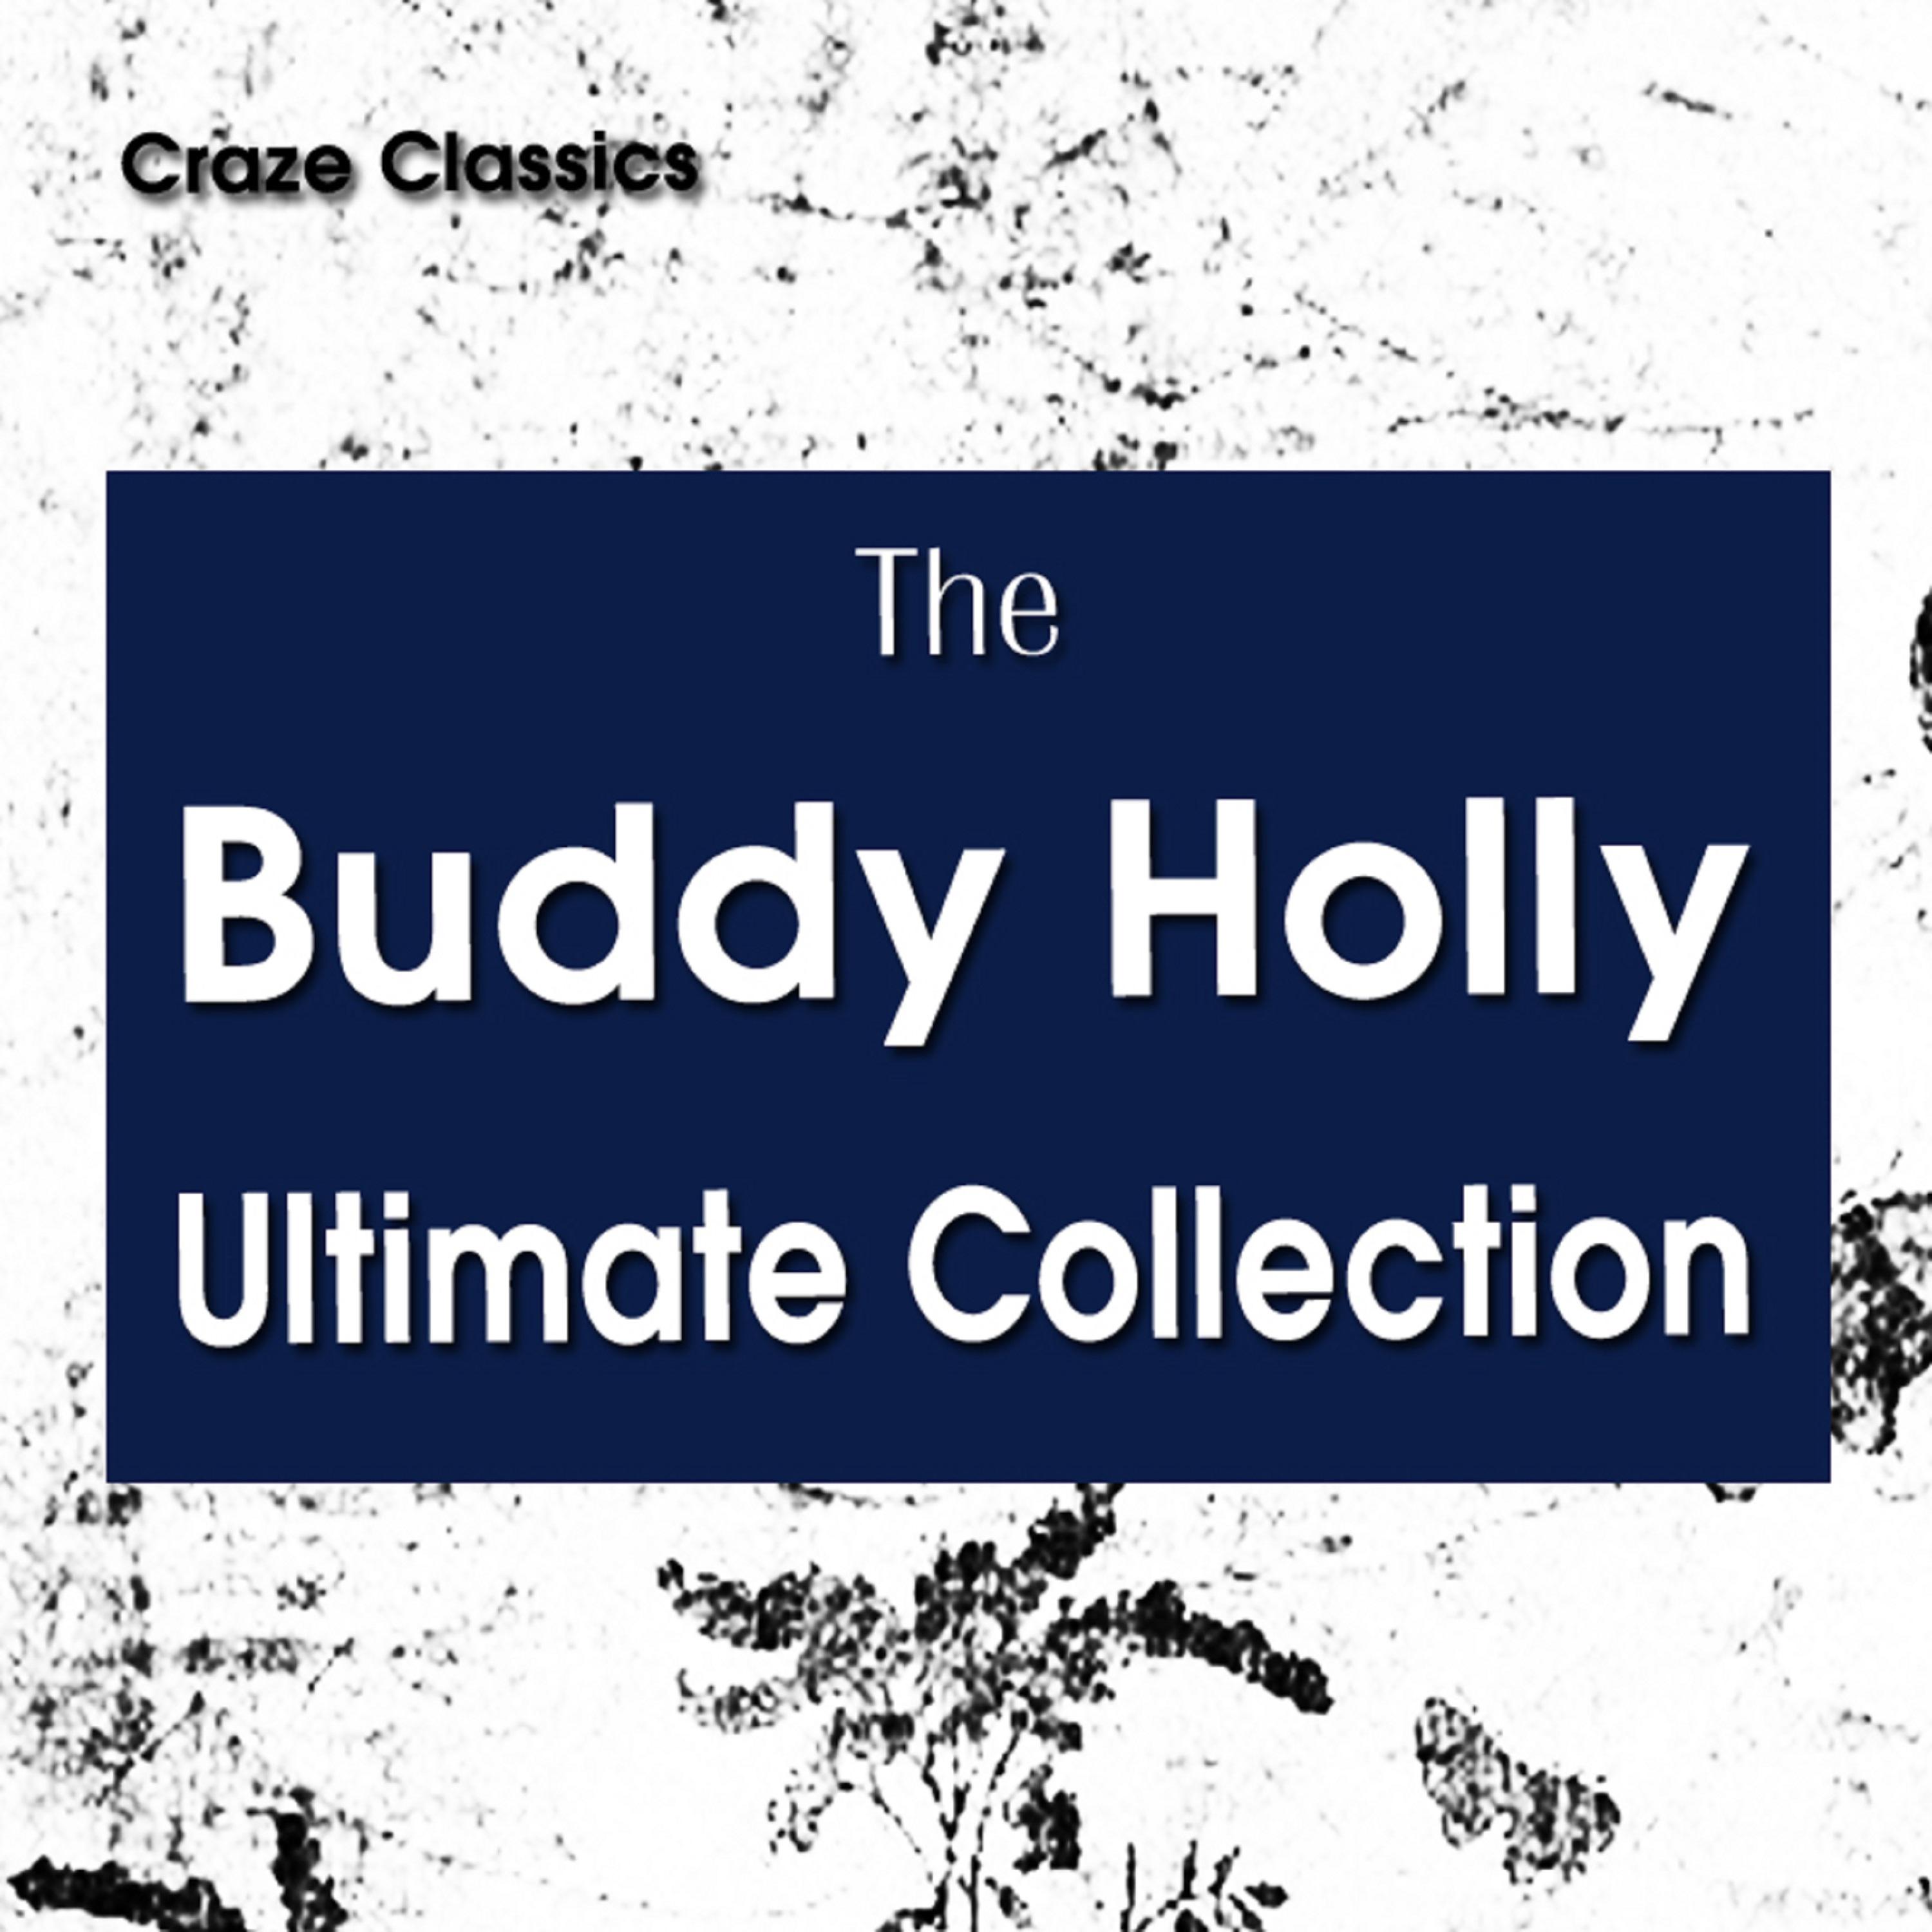 The Buddy Holly Ultimate Collection